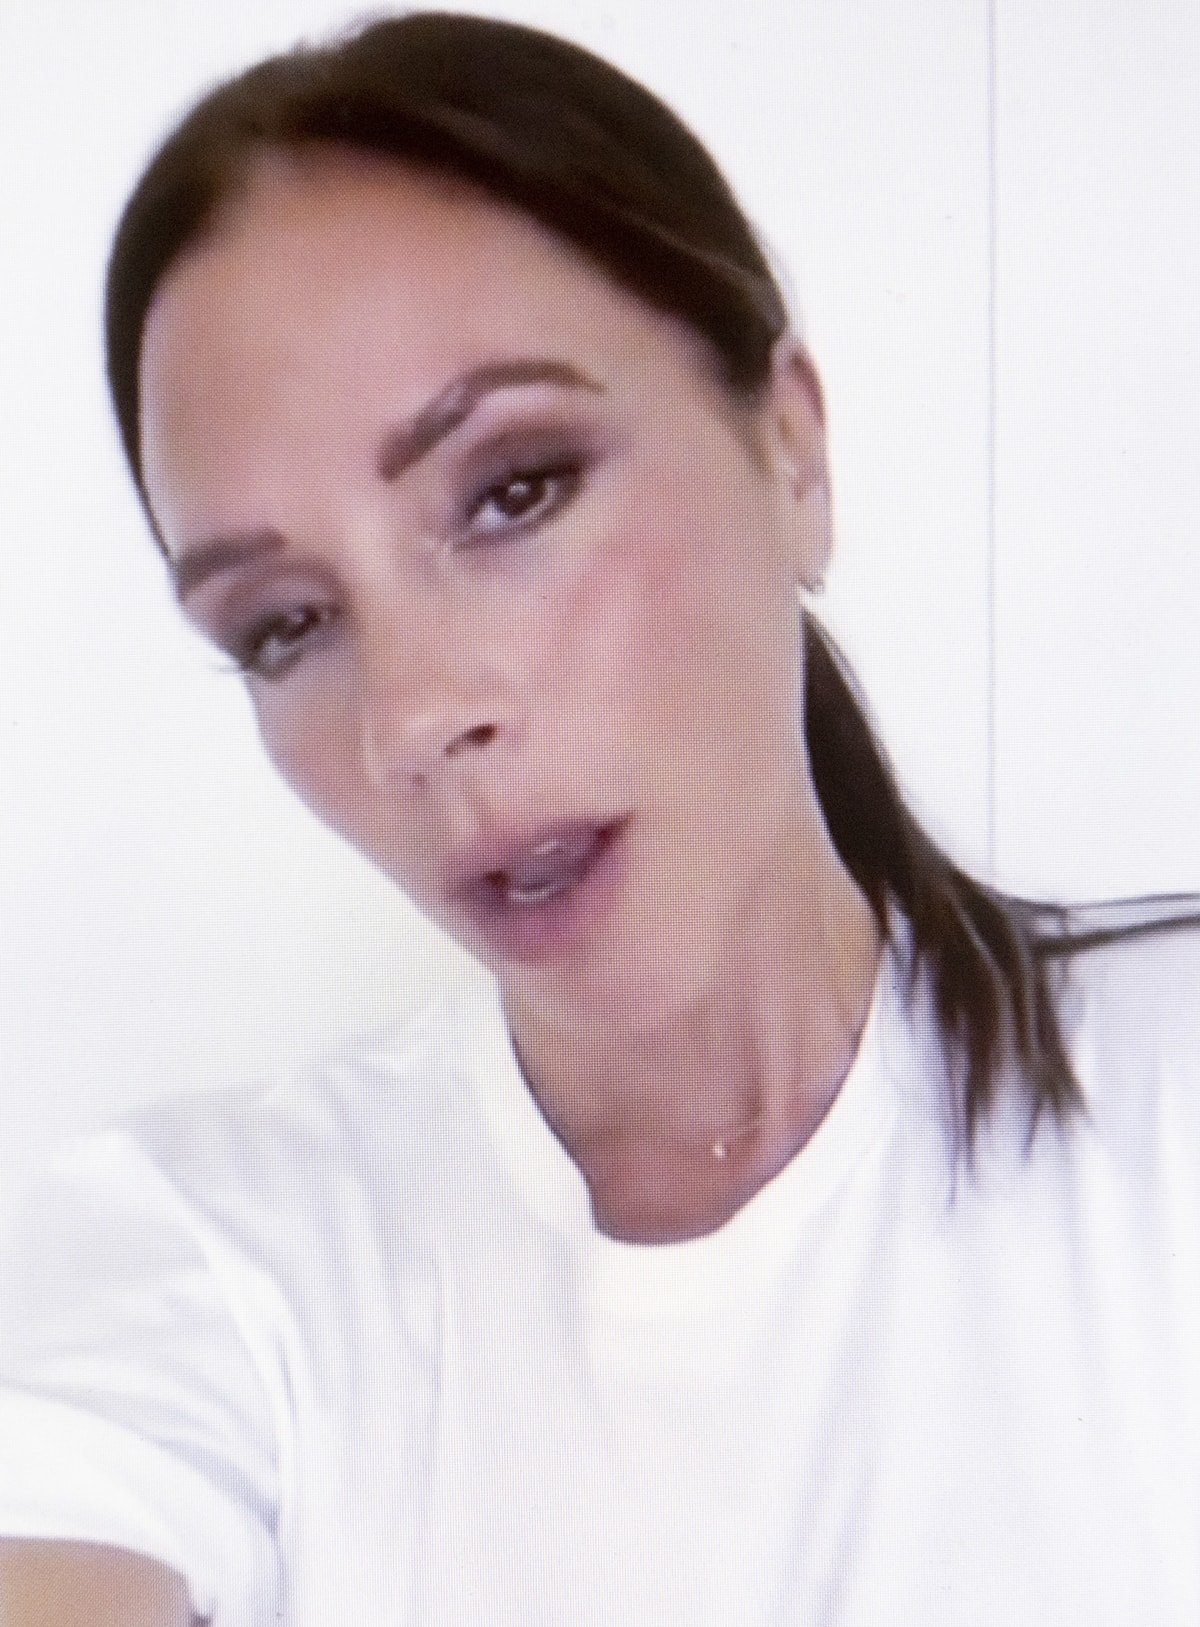 Victoria Beckham celebrated International Women's Day in 2021 by telling female fans to ‘burn your bras’